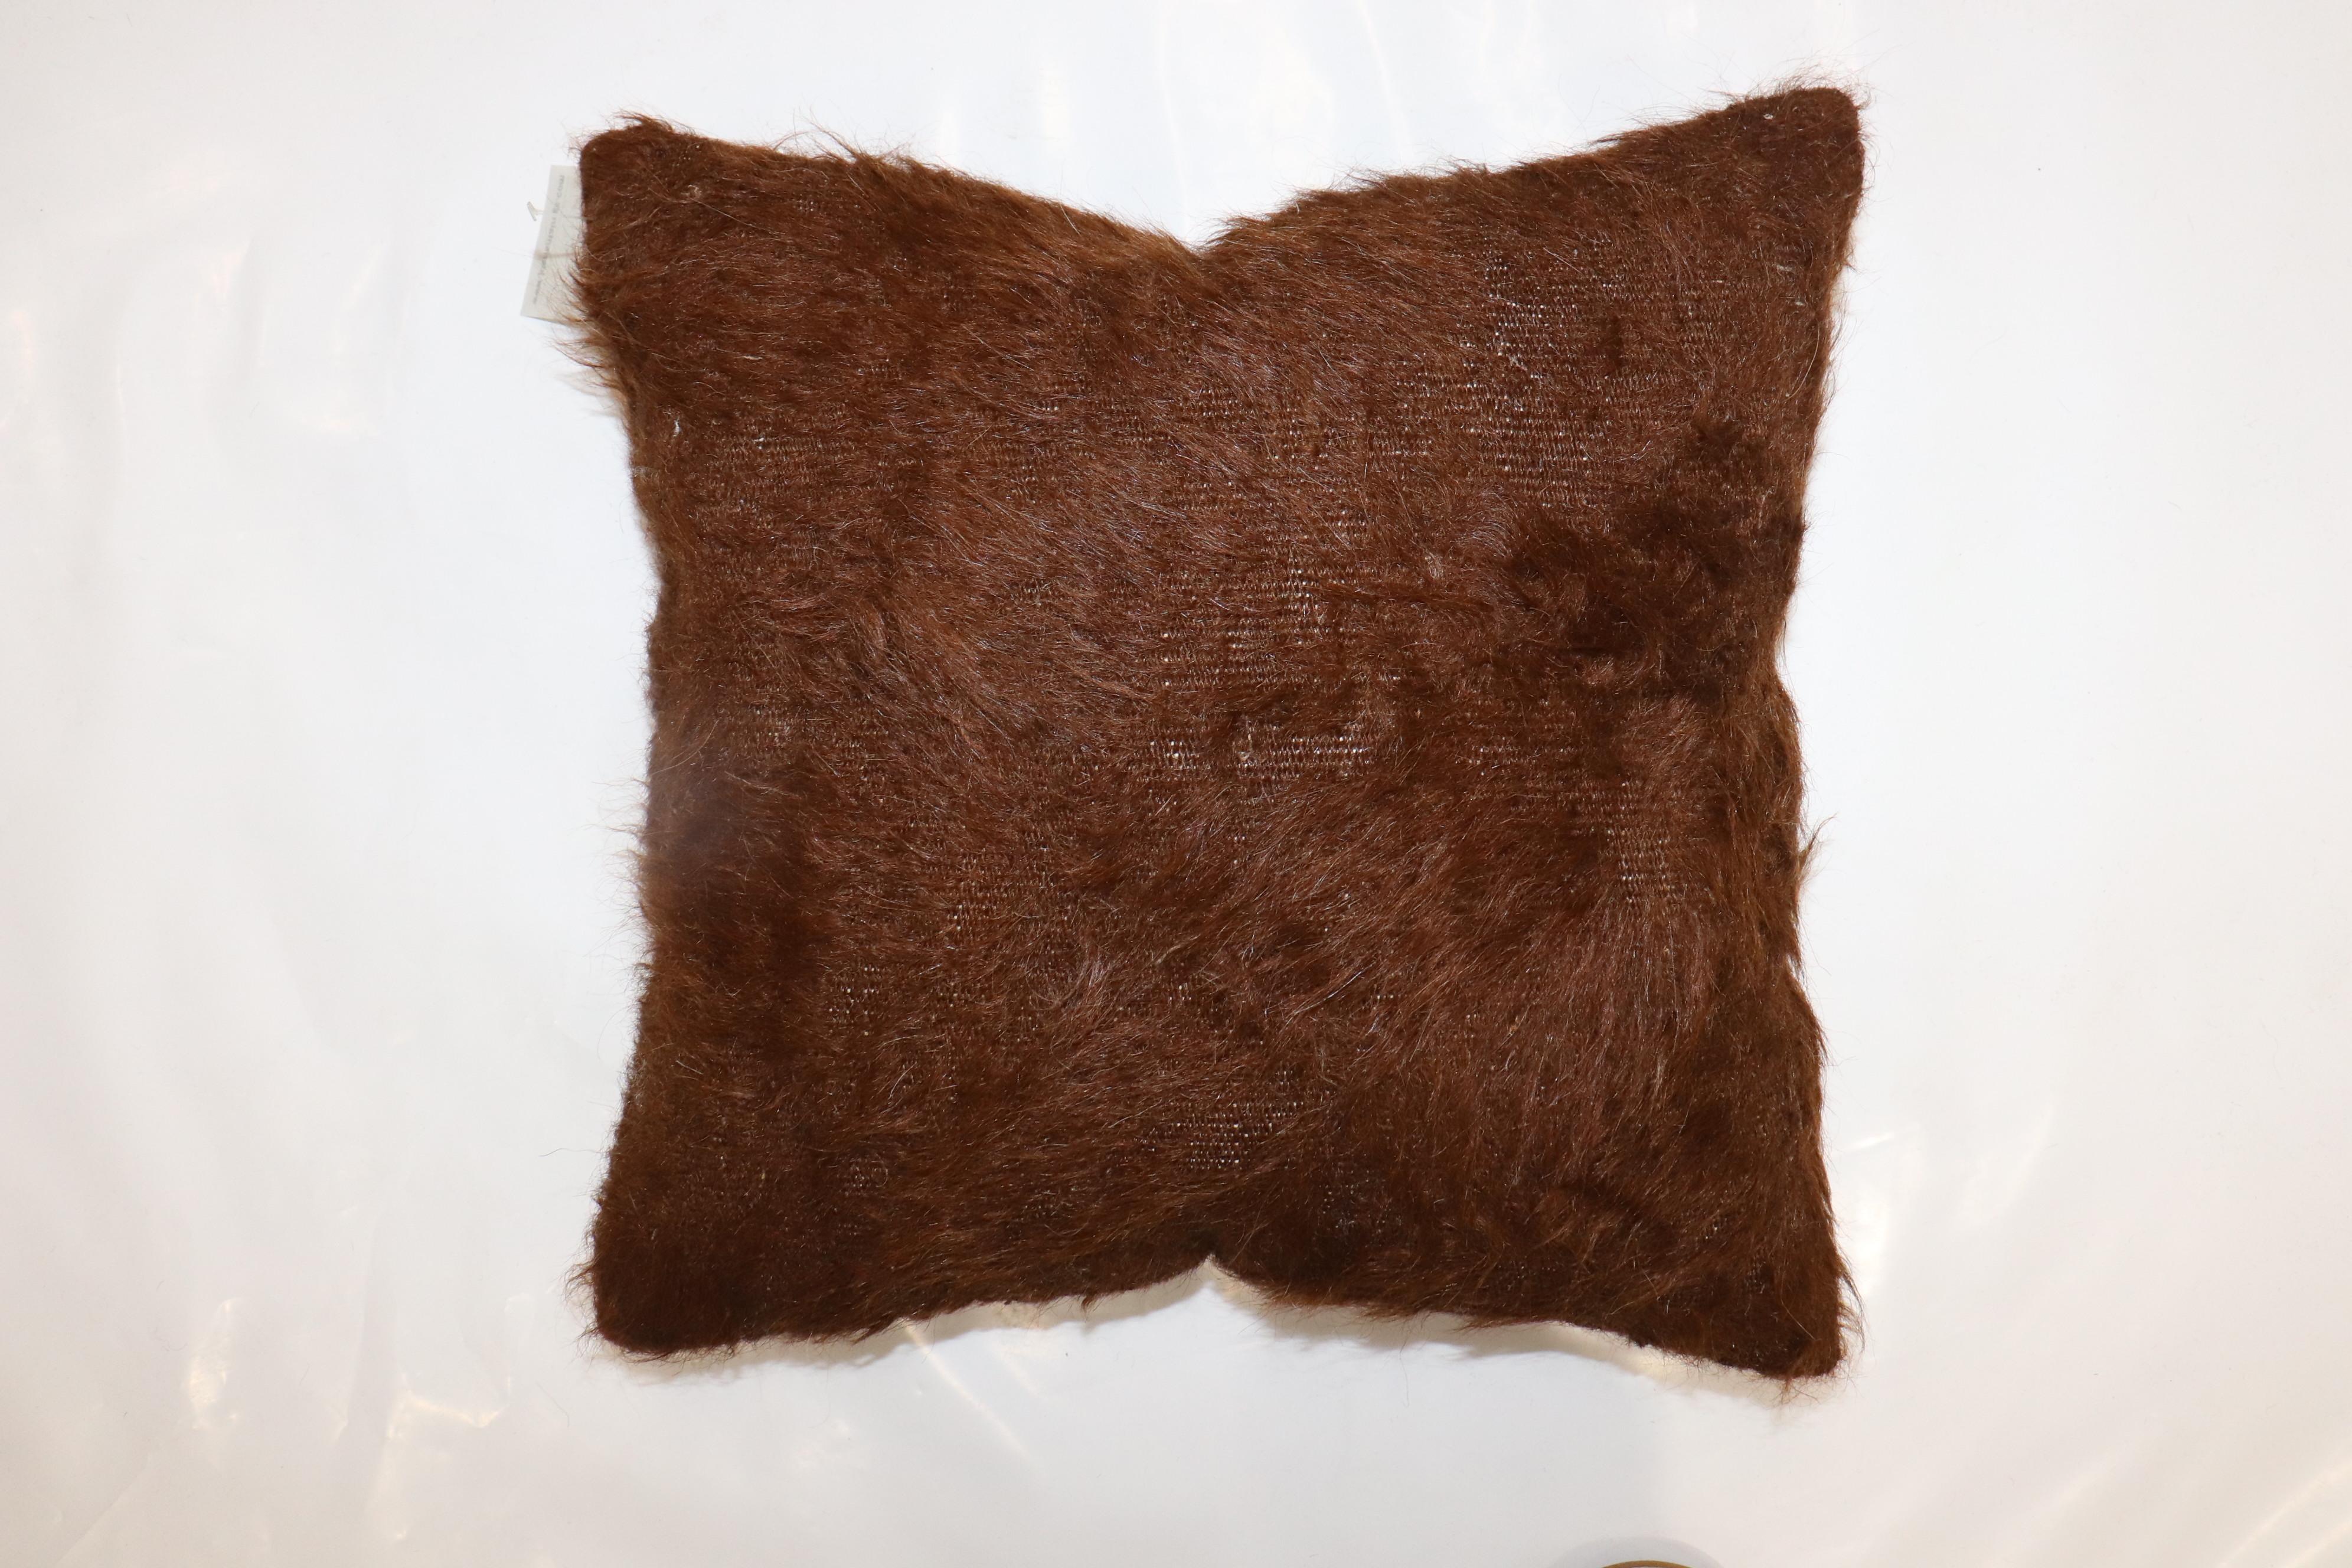 A small pillow made with a brown Turkish Mohair rug.

Measures: 15